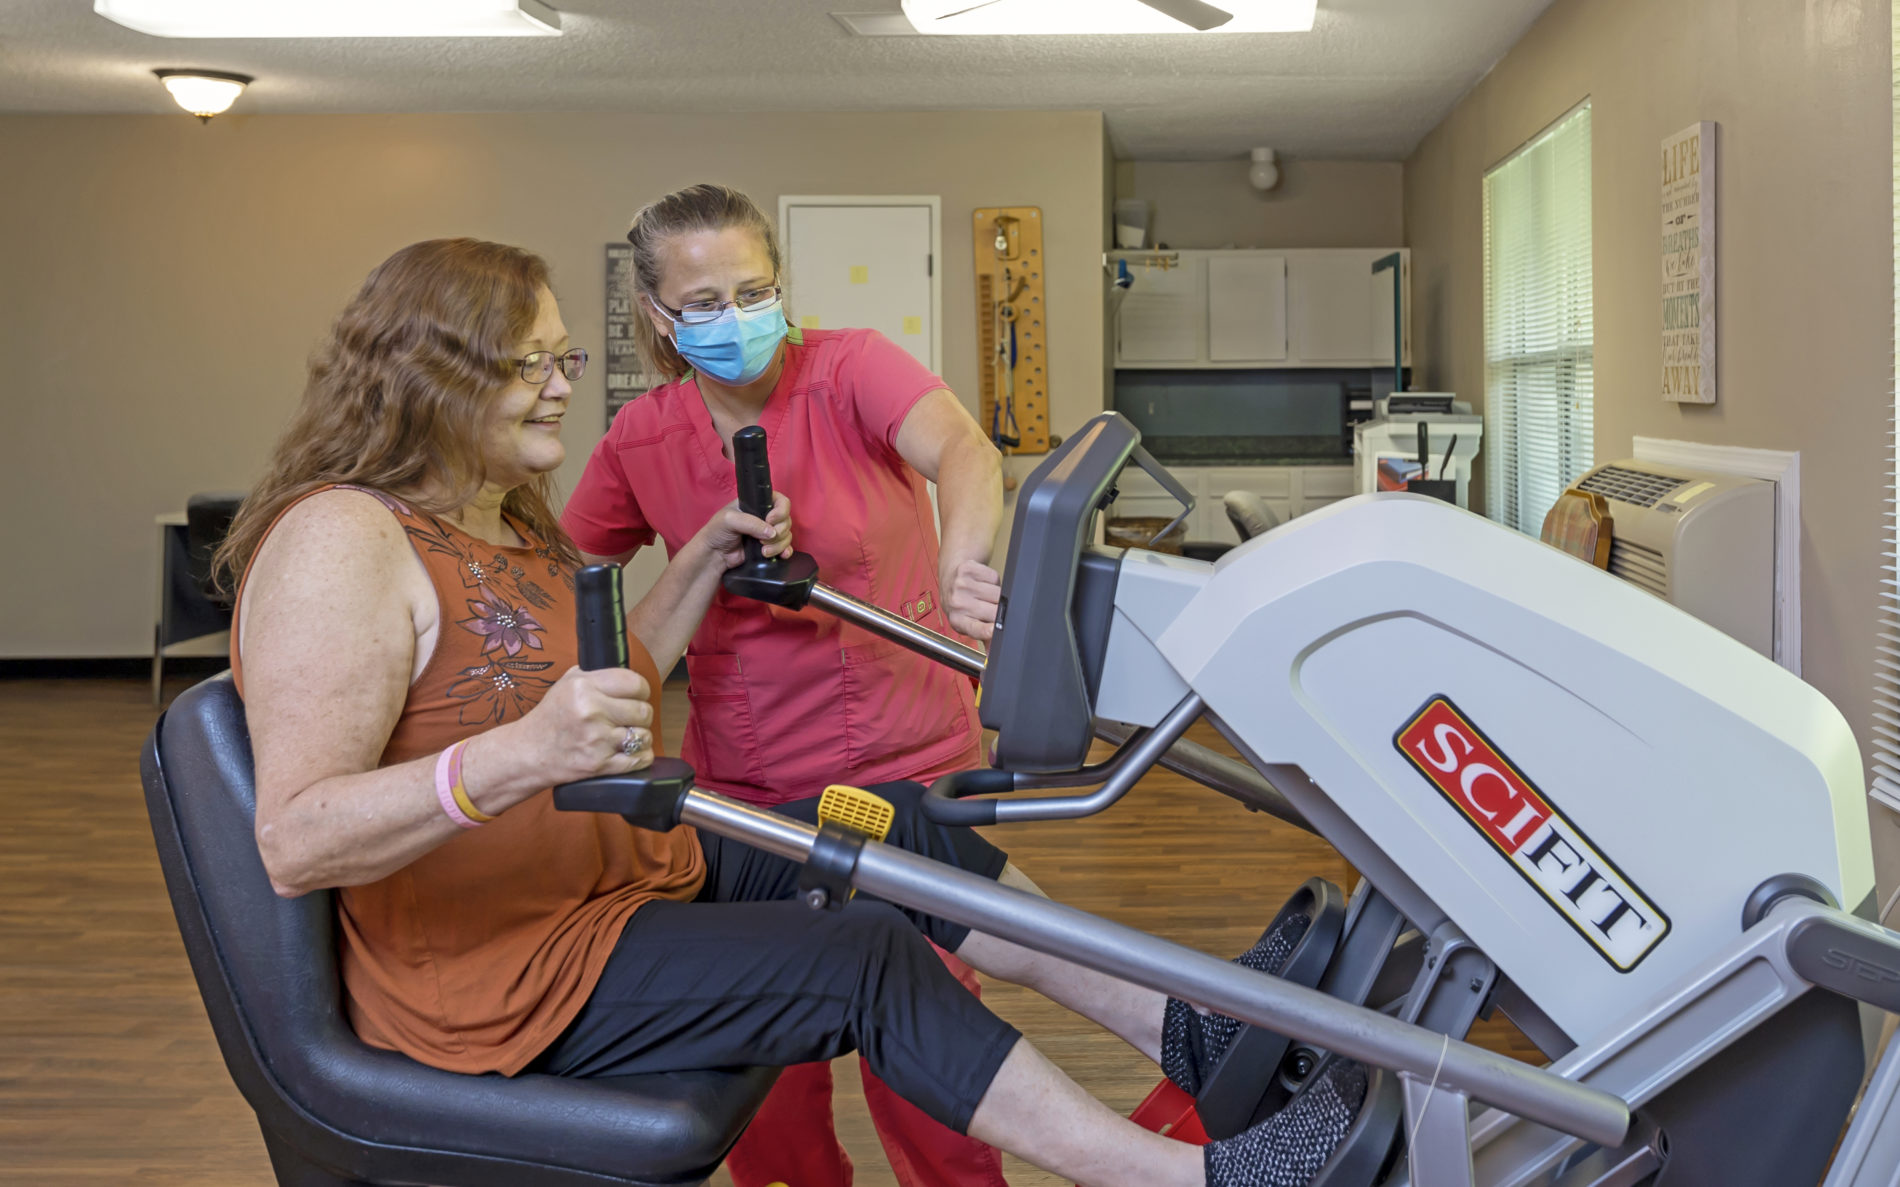 Female staff member helping woman on exercise machine